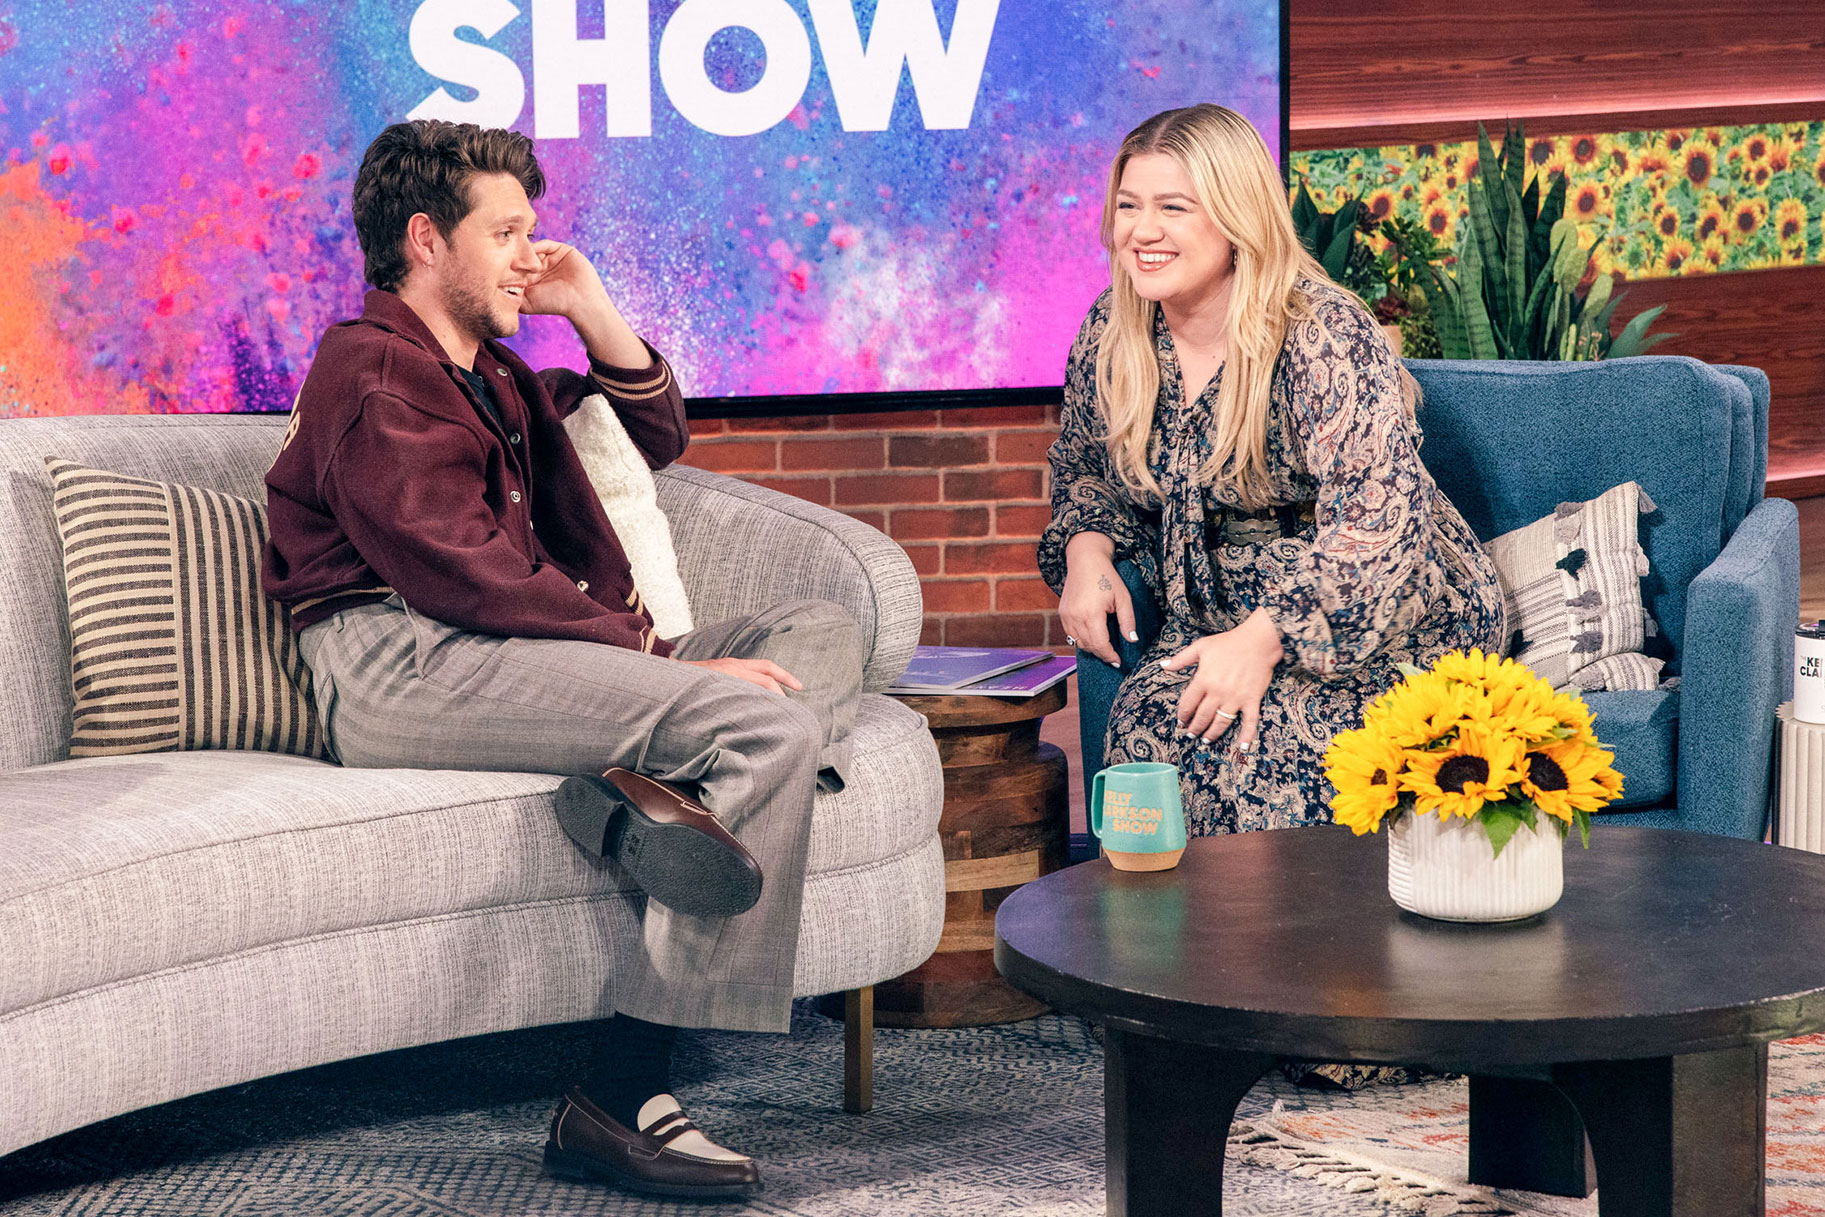 Niall Horan and Kelly Clarkson sitting on the couch of her talk show together